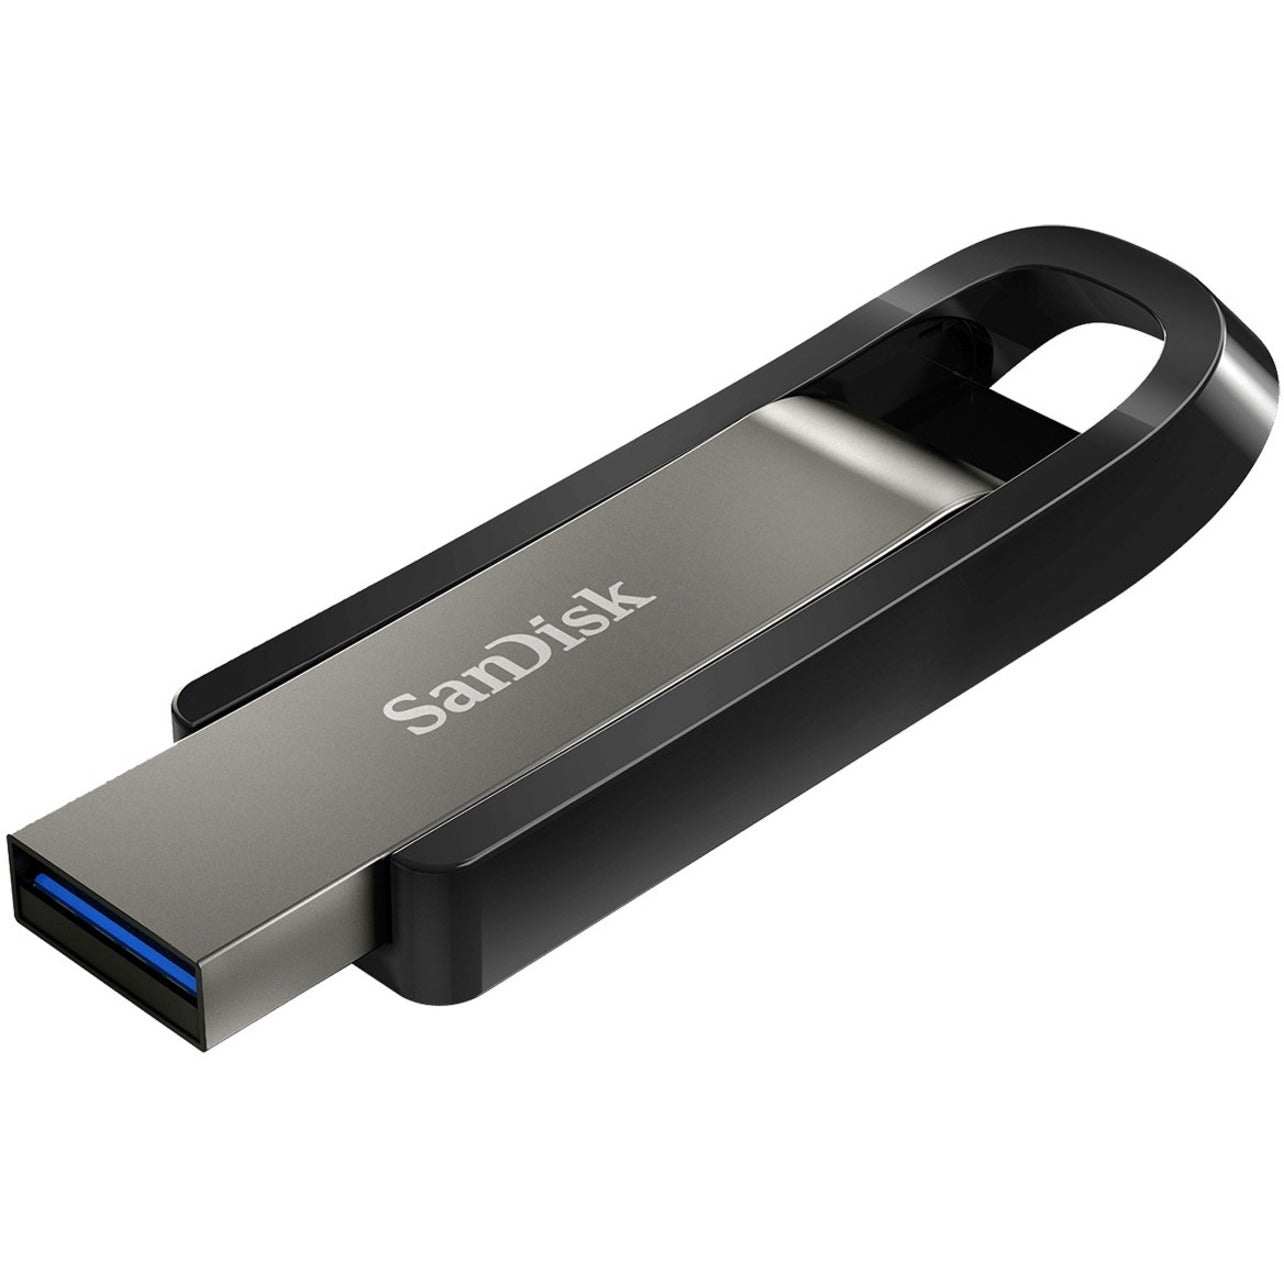 SanDisk SDCZ810-256G-A46 Extreme Go USB 3.2 Flash Drive - 256GB, Fast Transfer Speeds, Durable Design